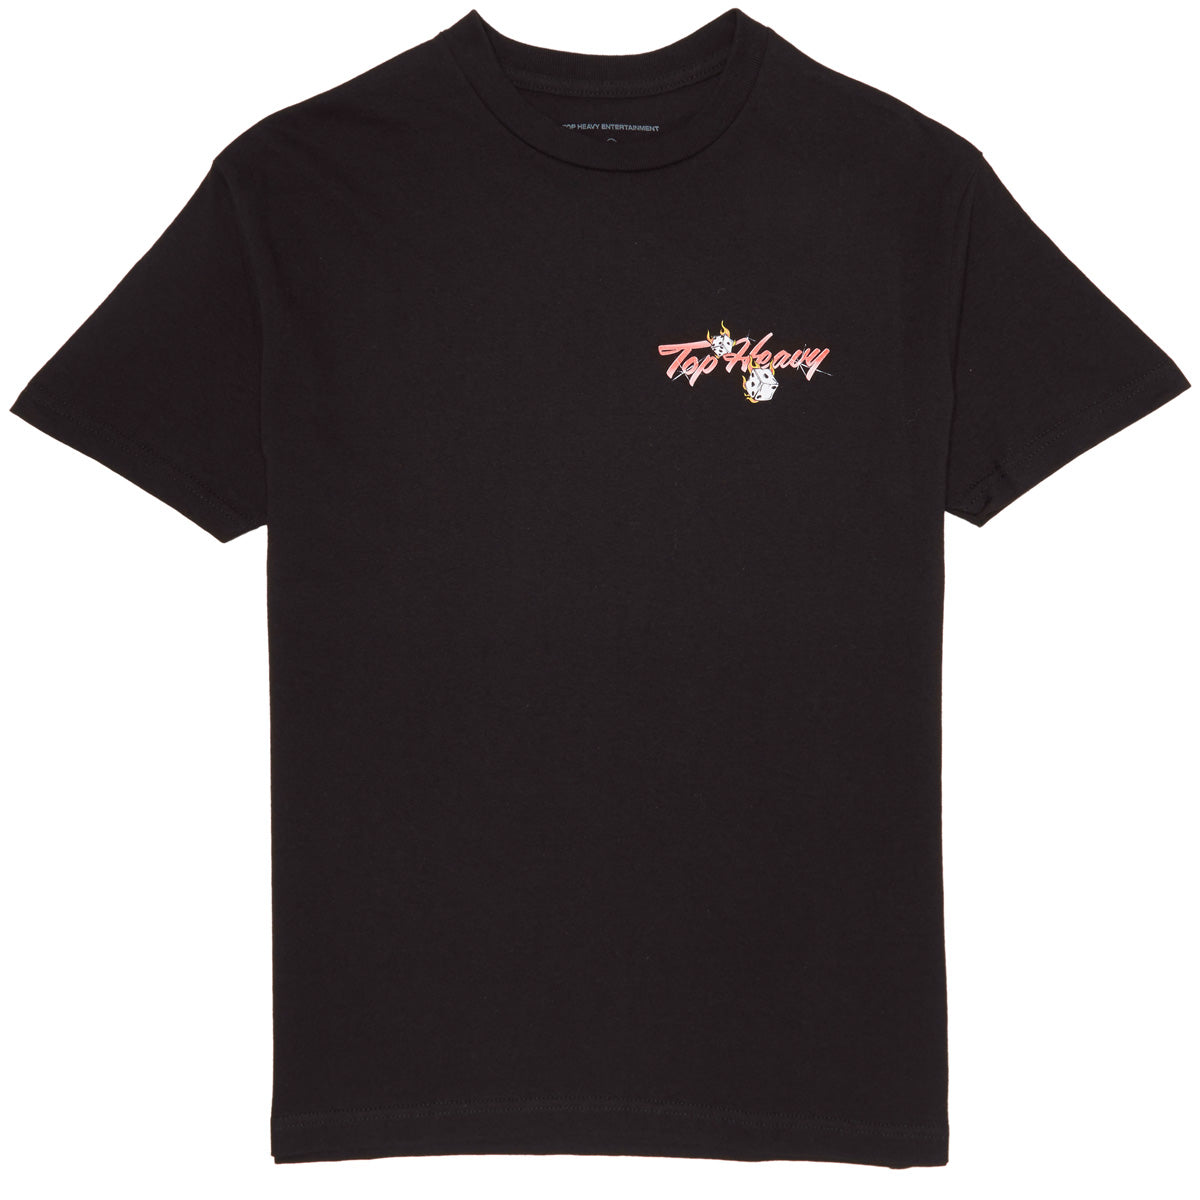 Top Heavy High Stakes T-Shirt - Black image 2